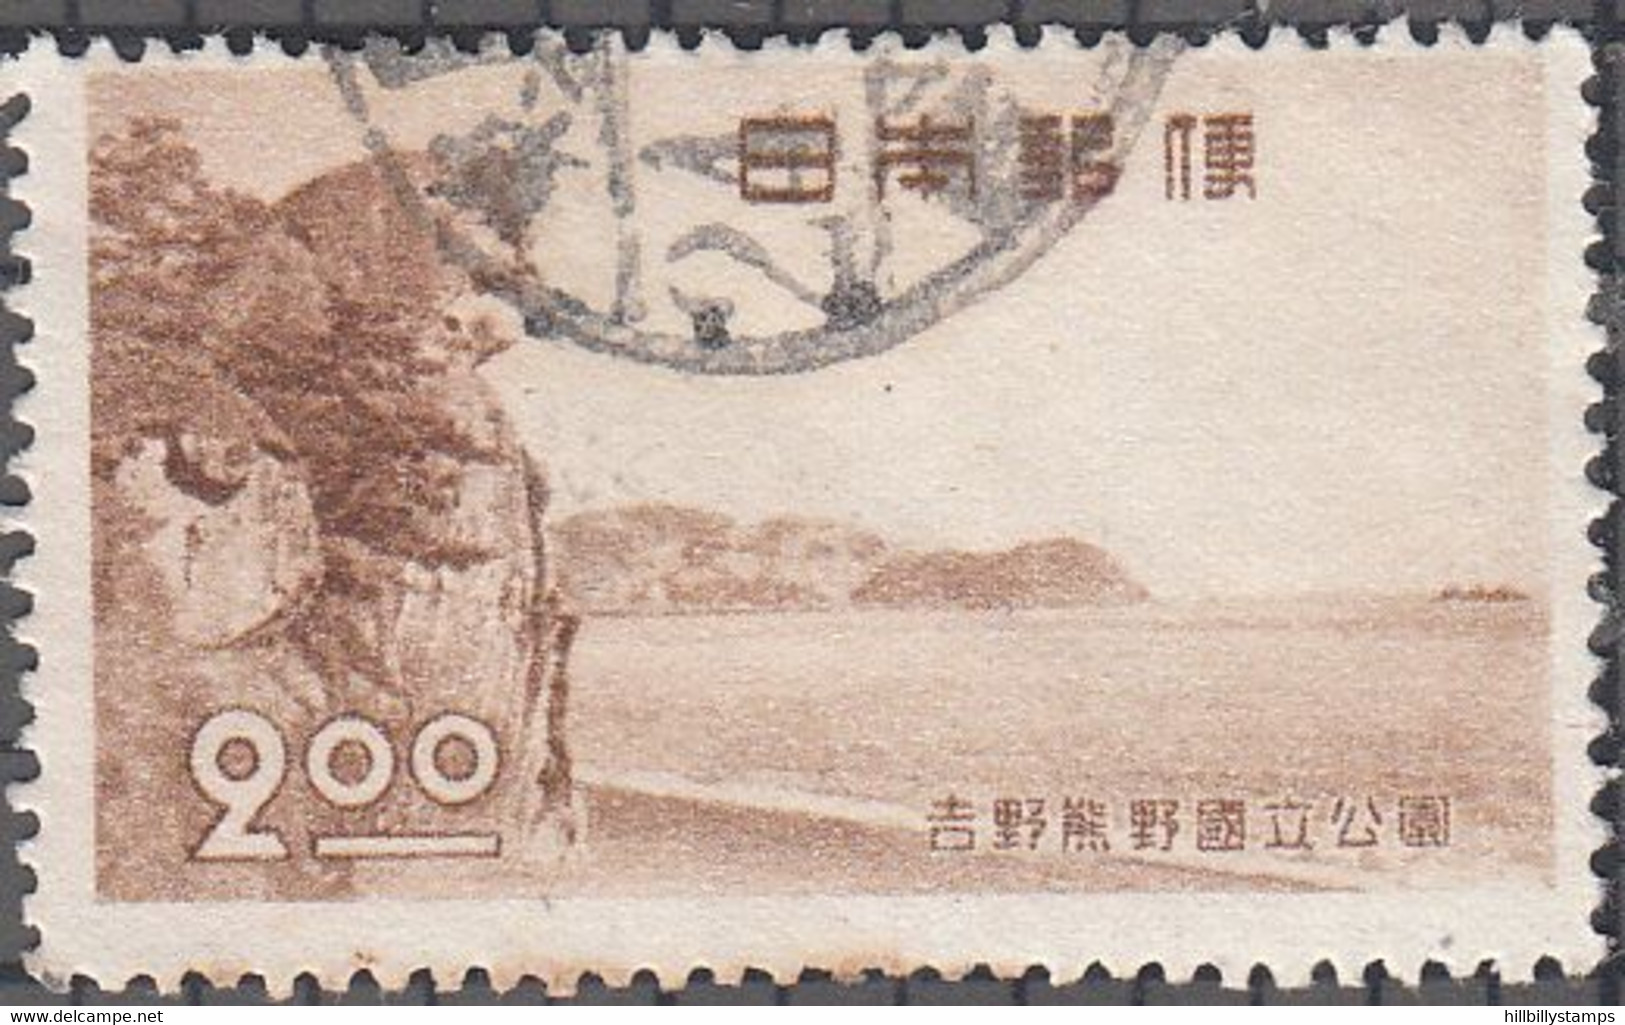 JAPAN   SCOTT NO 450  USED  YEAR  1949 - Used Stamps